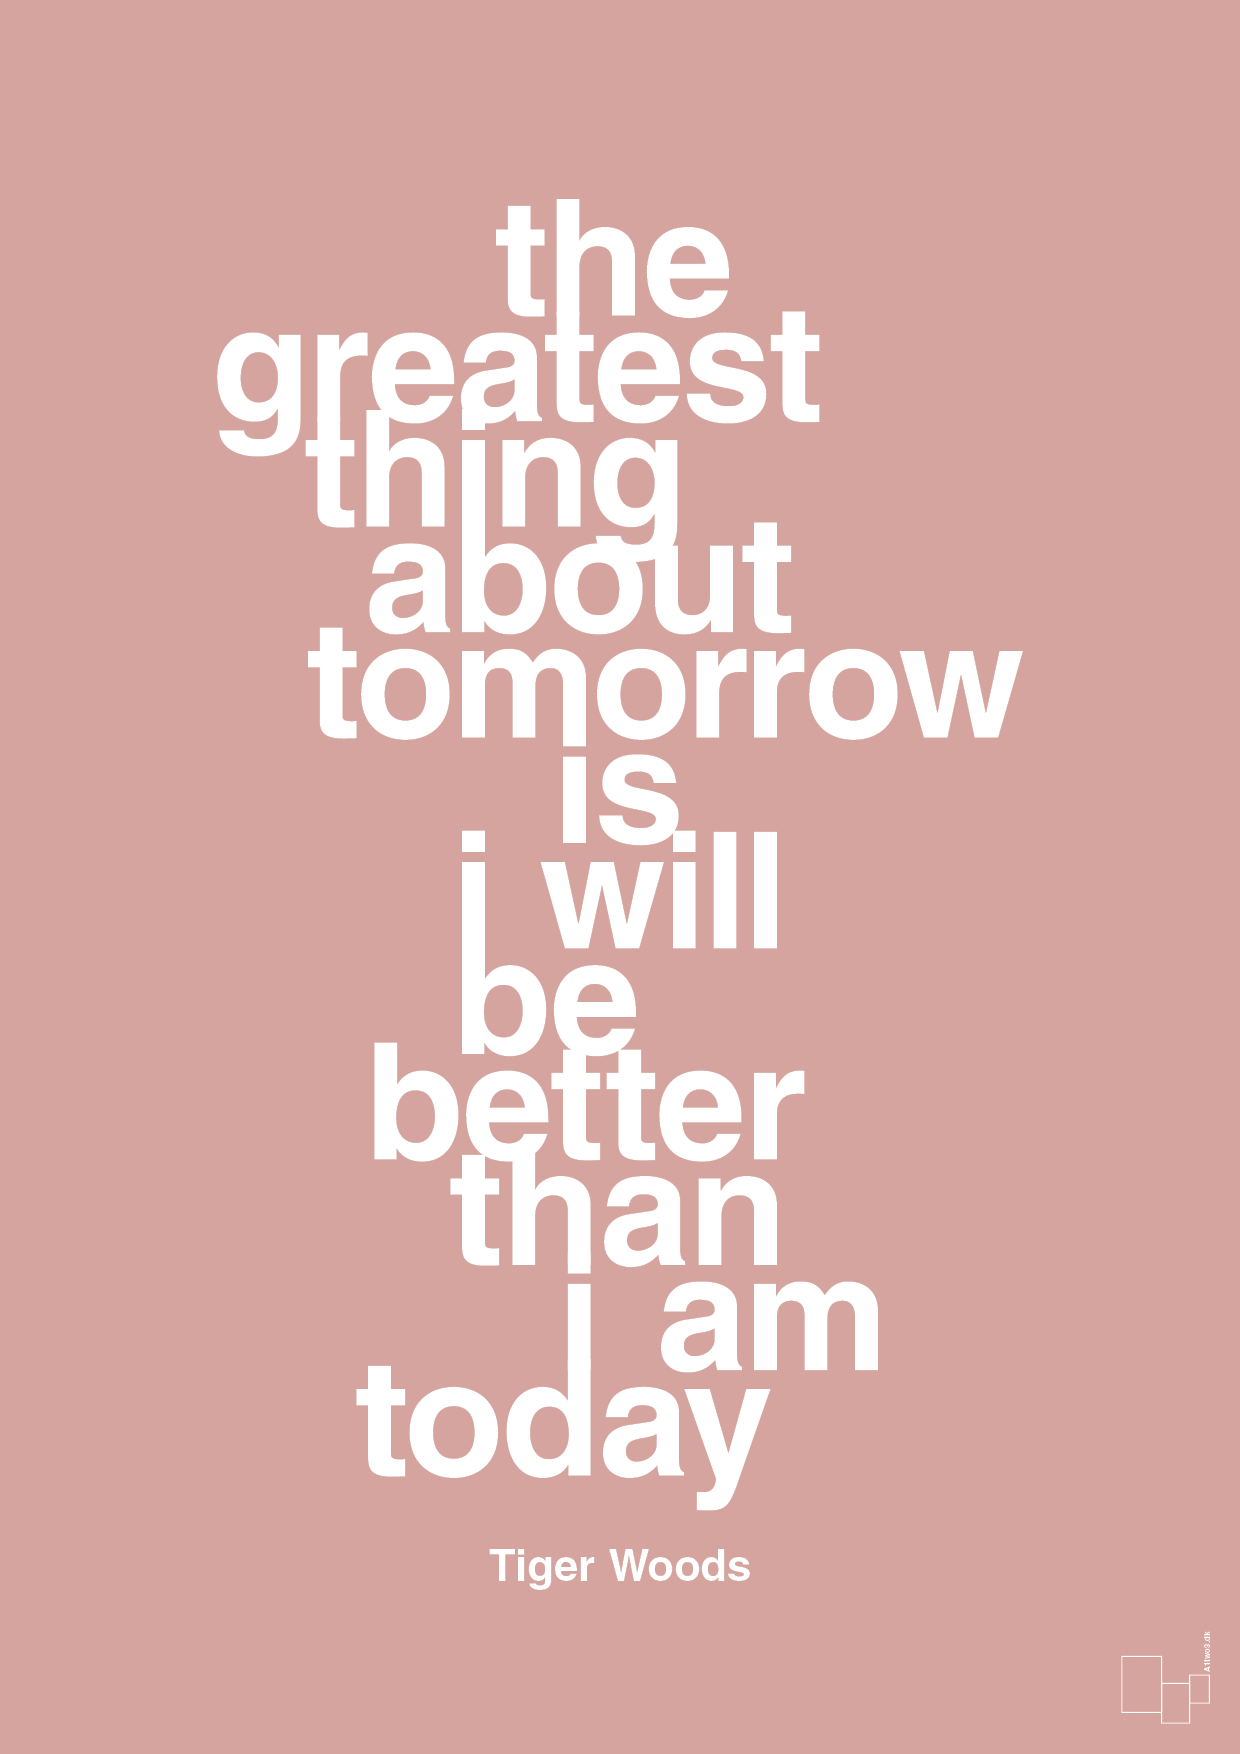 the greatest thing about tomorrow is i will be better than i am today - Plakat med Citater i Bubble Shell